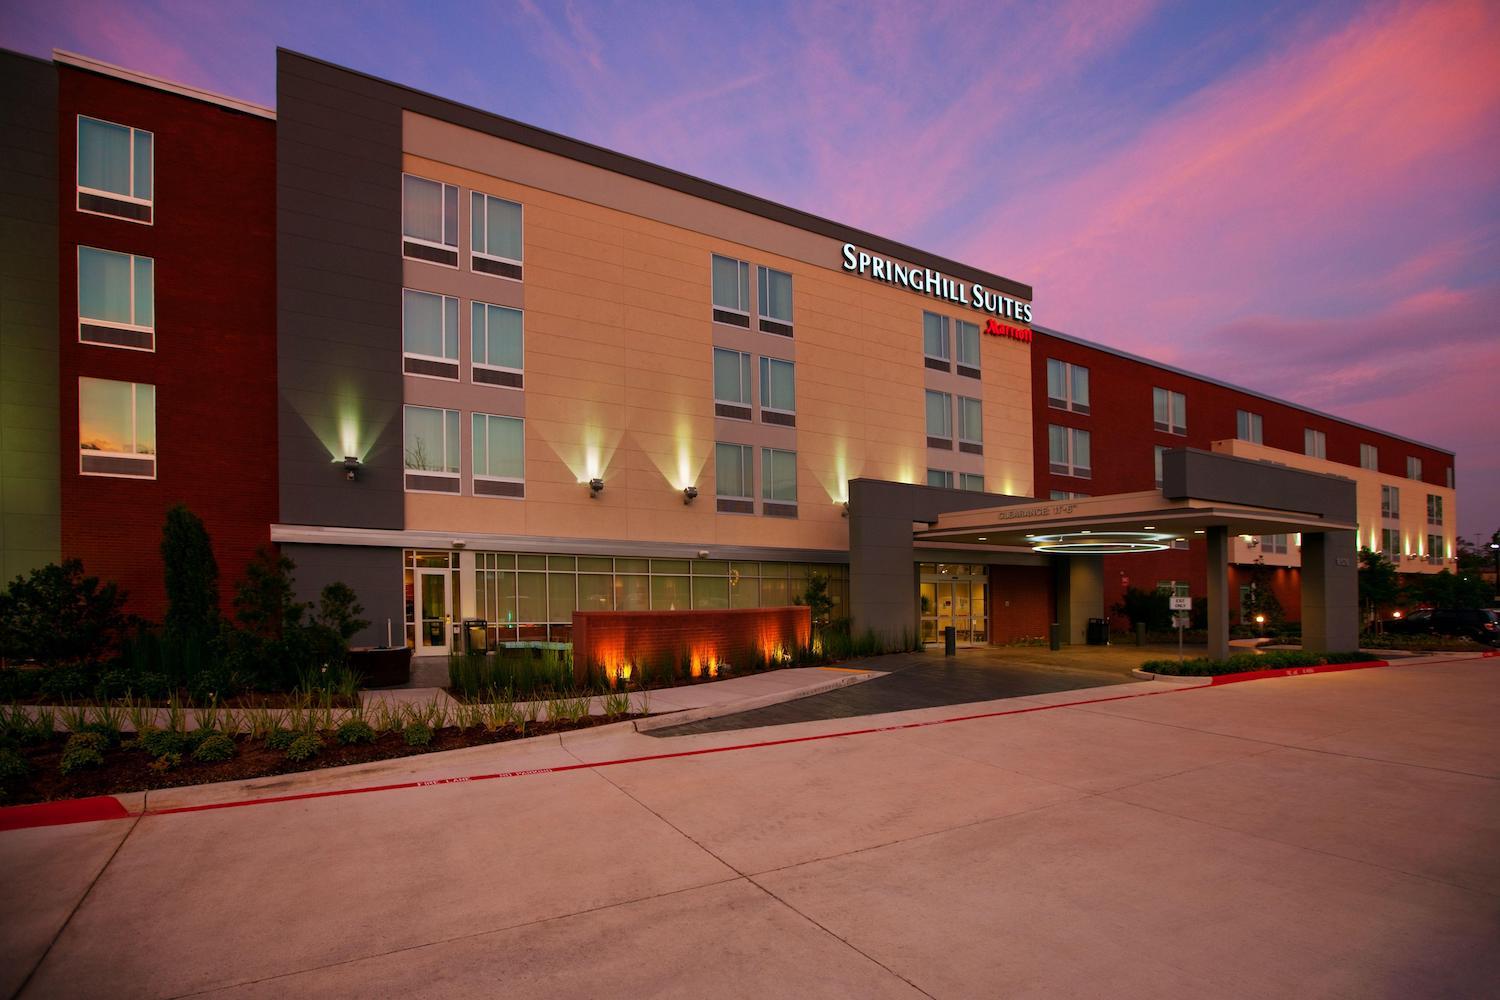 Photo of SpringHill Suites by Marriott Houston The Woodlands, The Woodlands, TX